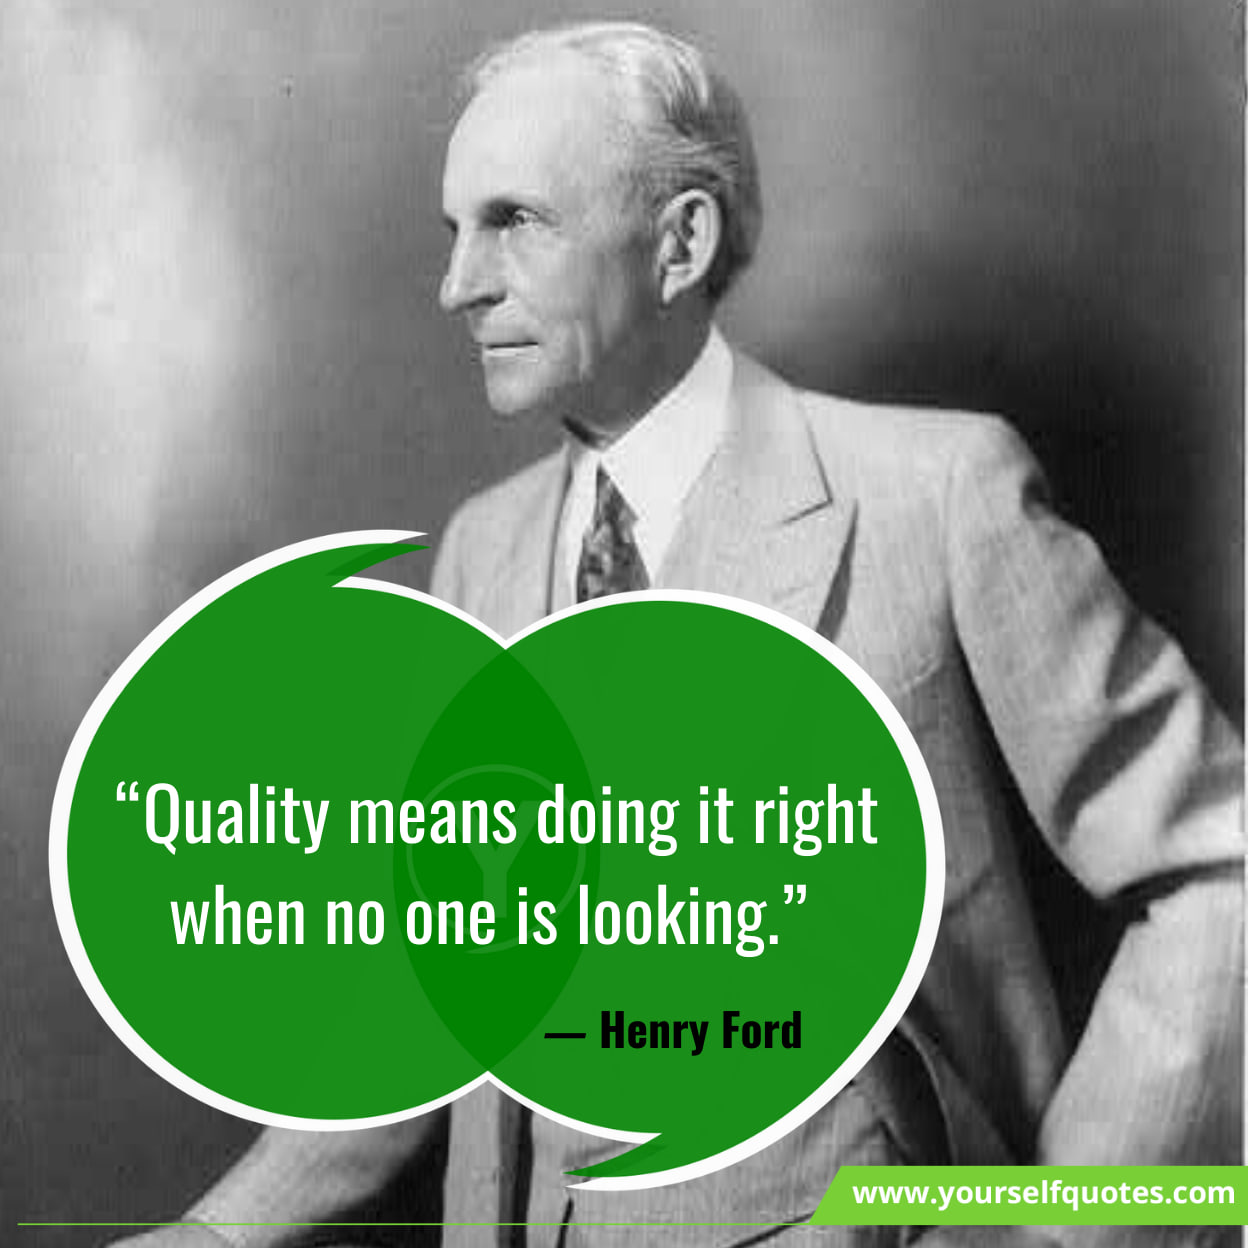 Henry Ford Quotes On Teamwork